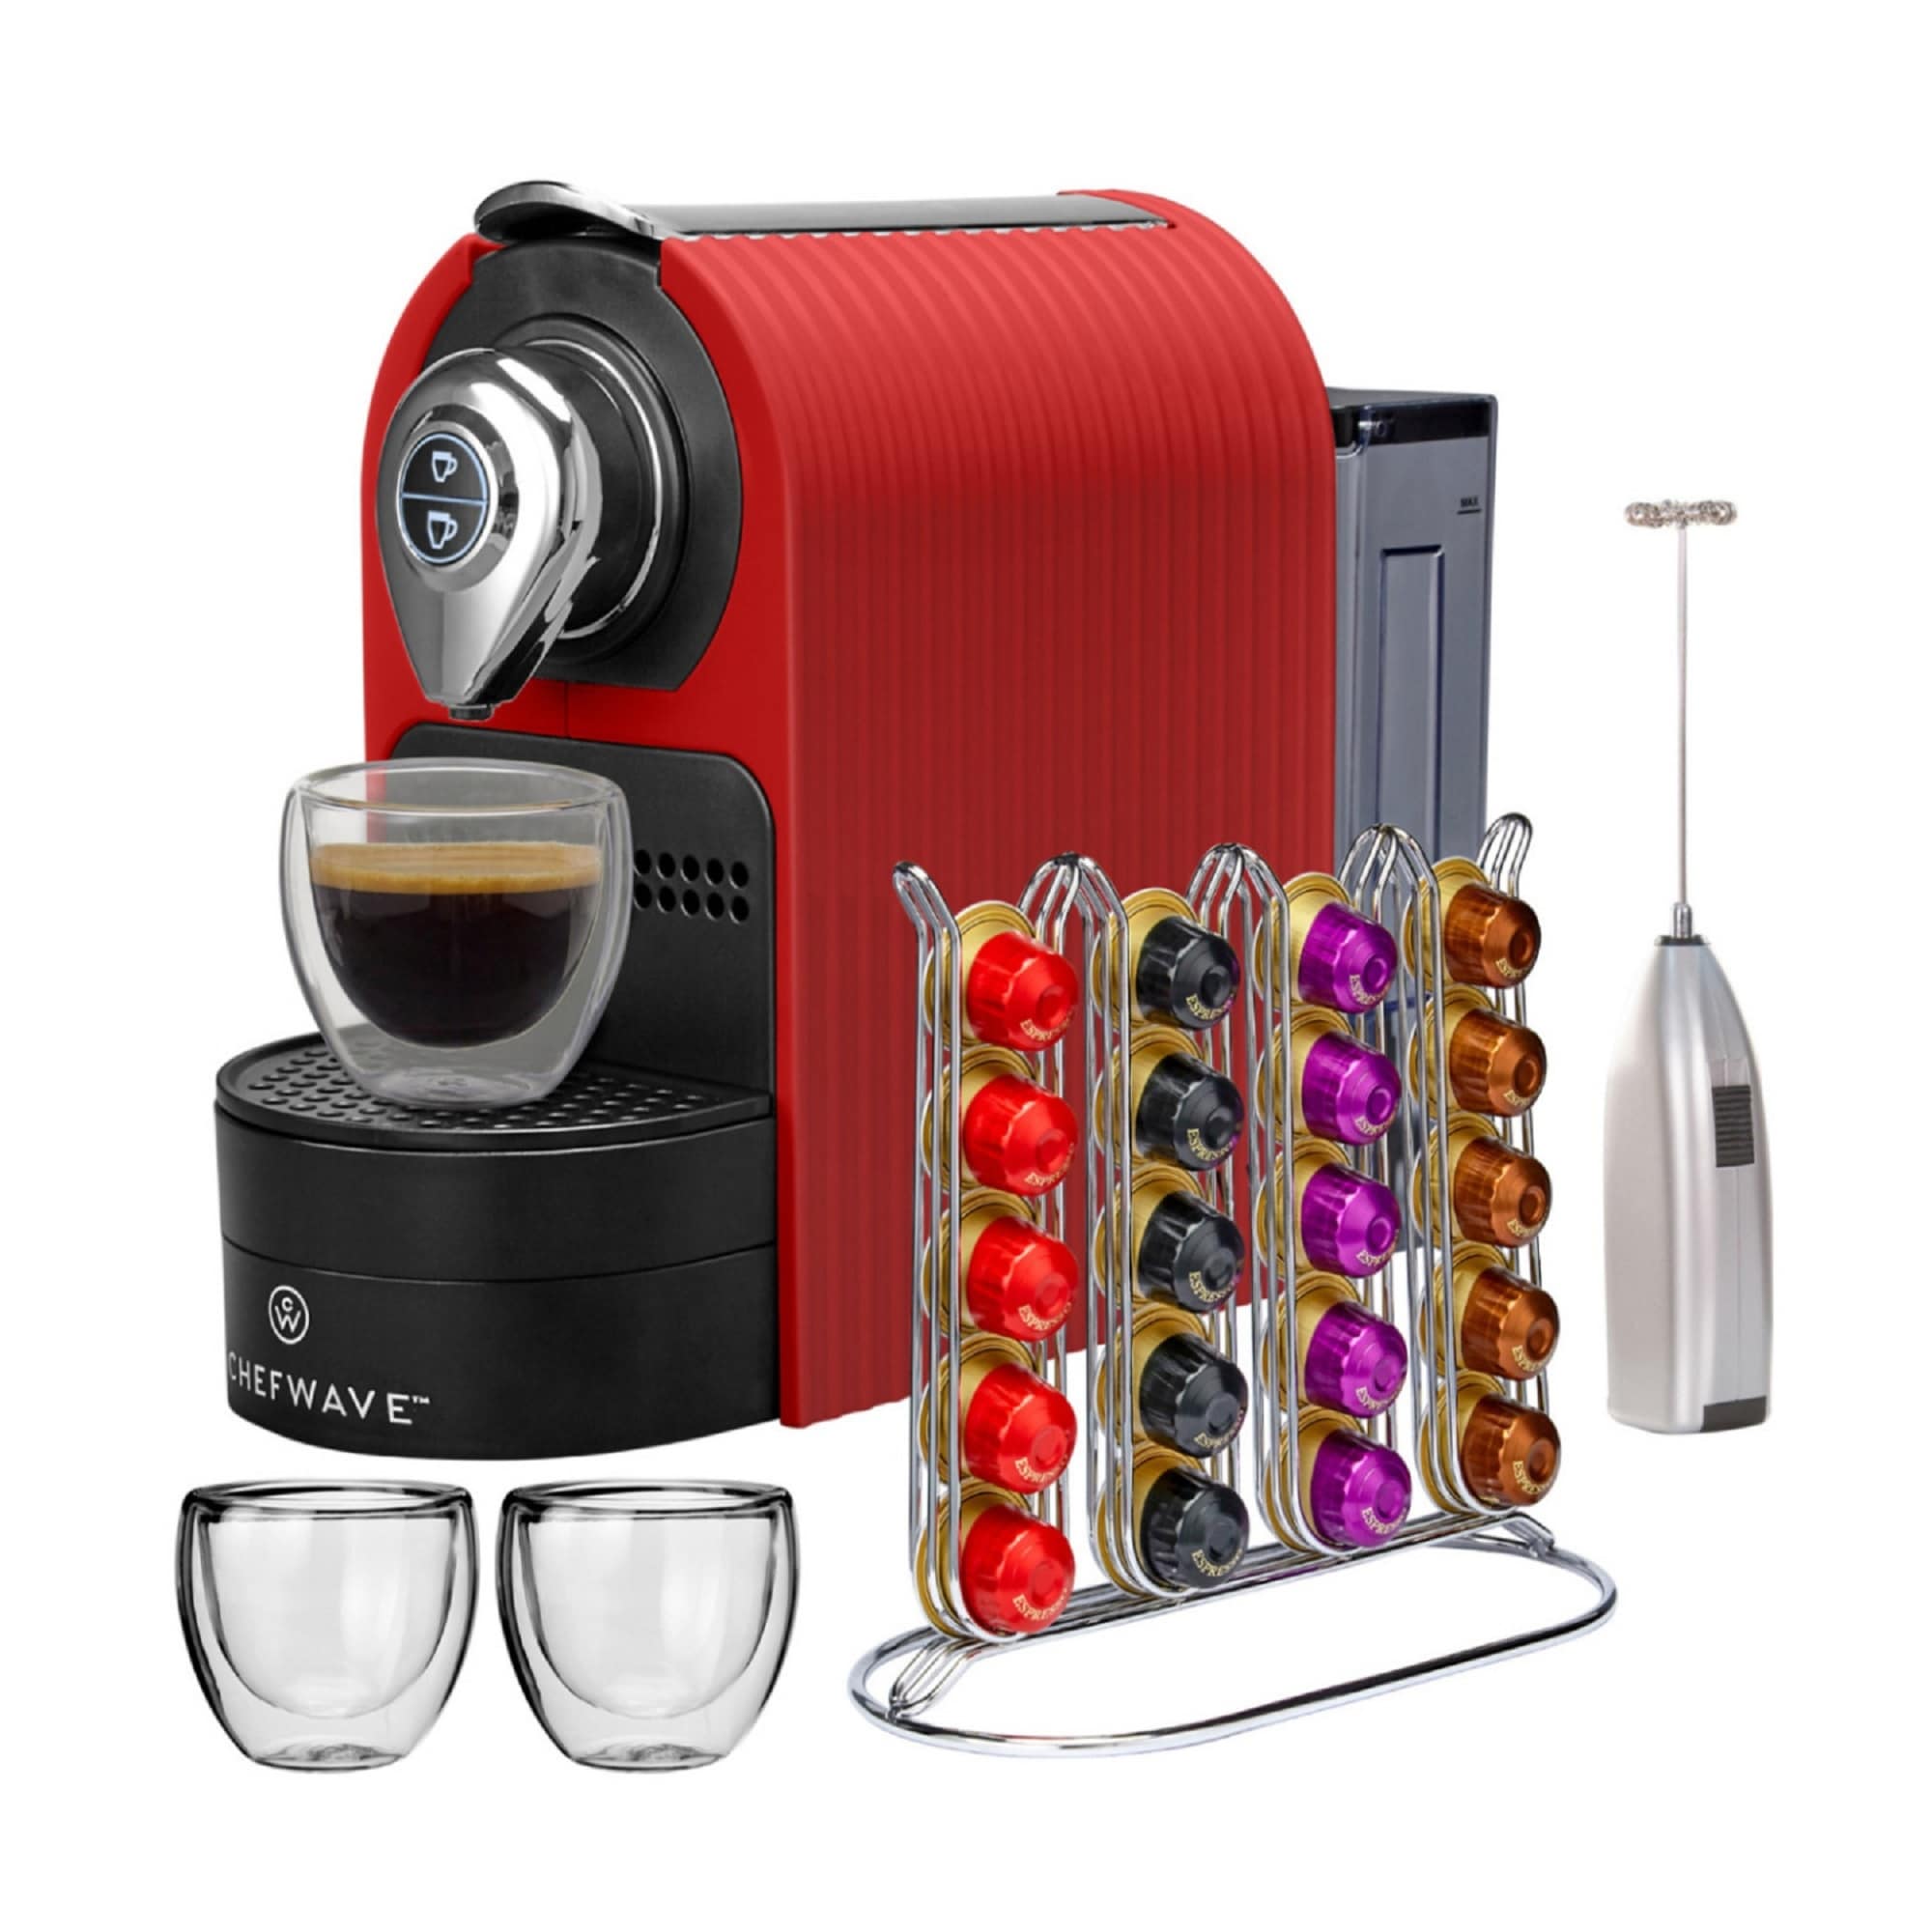 https://ak1.ostkcdn.com/images/products/is/images/direct/44b2b40ff1c095d3e792d60fa53e2cea64b72052/ChefWave-Kava-Espresso-Machine-%28Red%29-w--Knox-Handheld-Milk-Frother.jpg